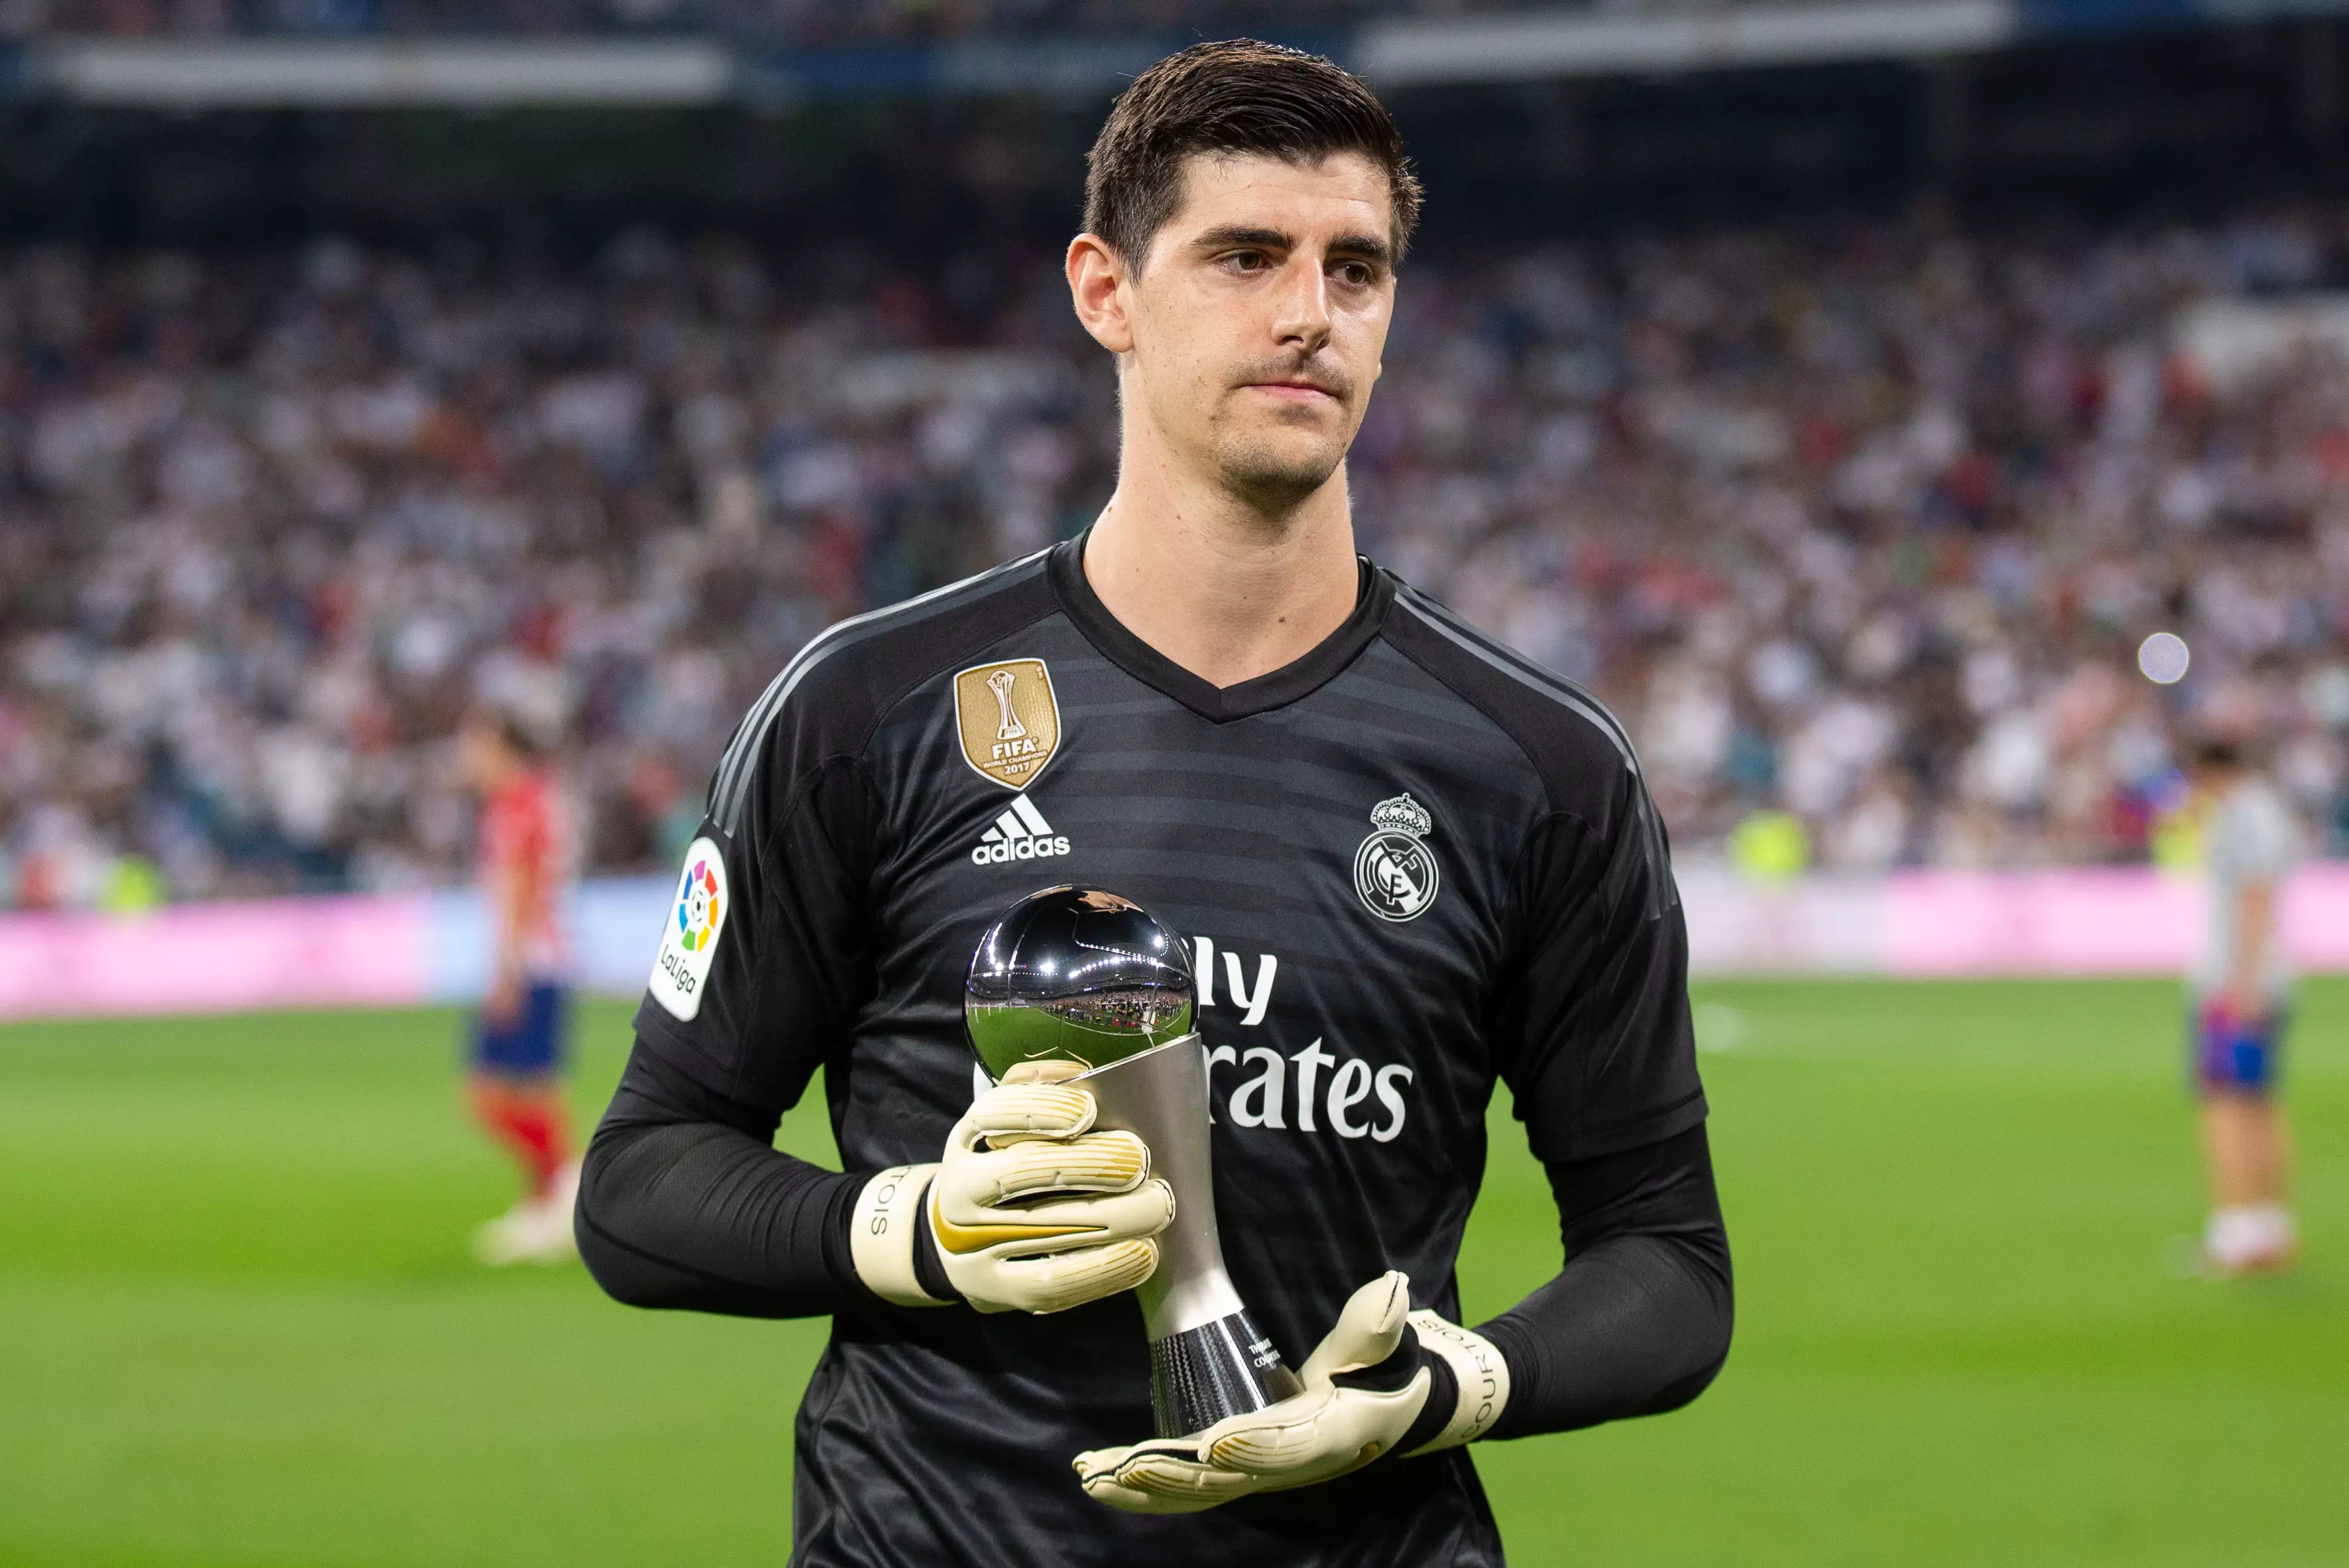 De Gea has previously been linked to Real Madrid but they signed Courtois in the summer. Image: PA Images